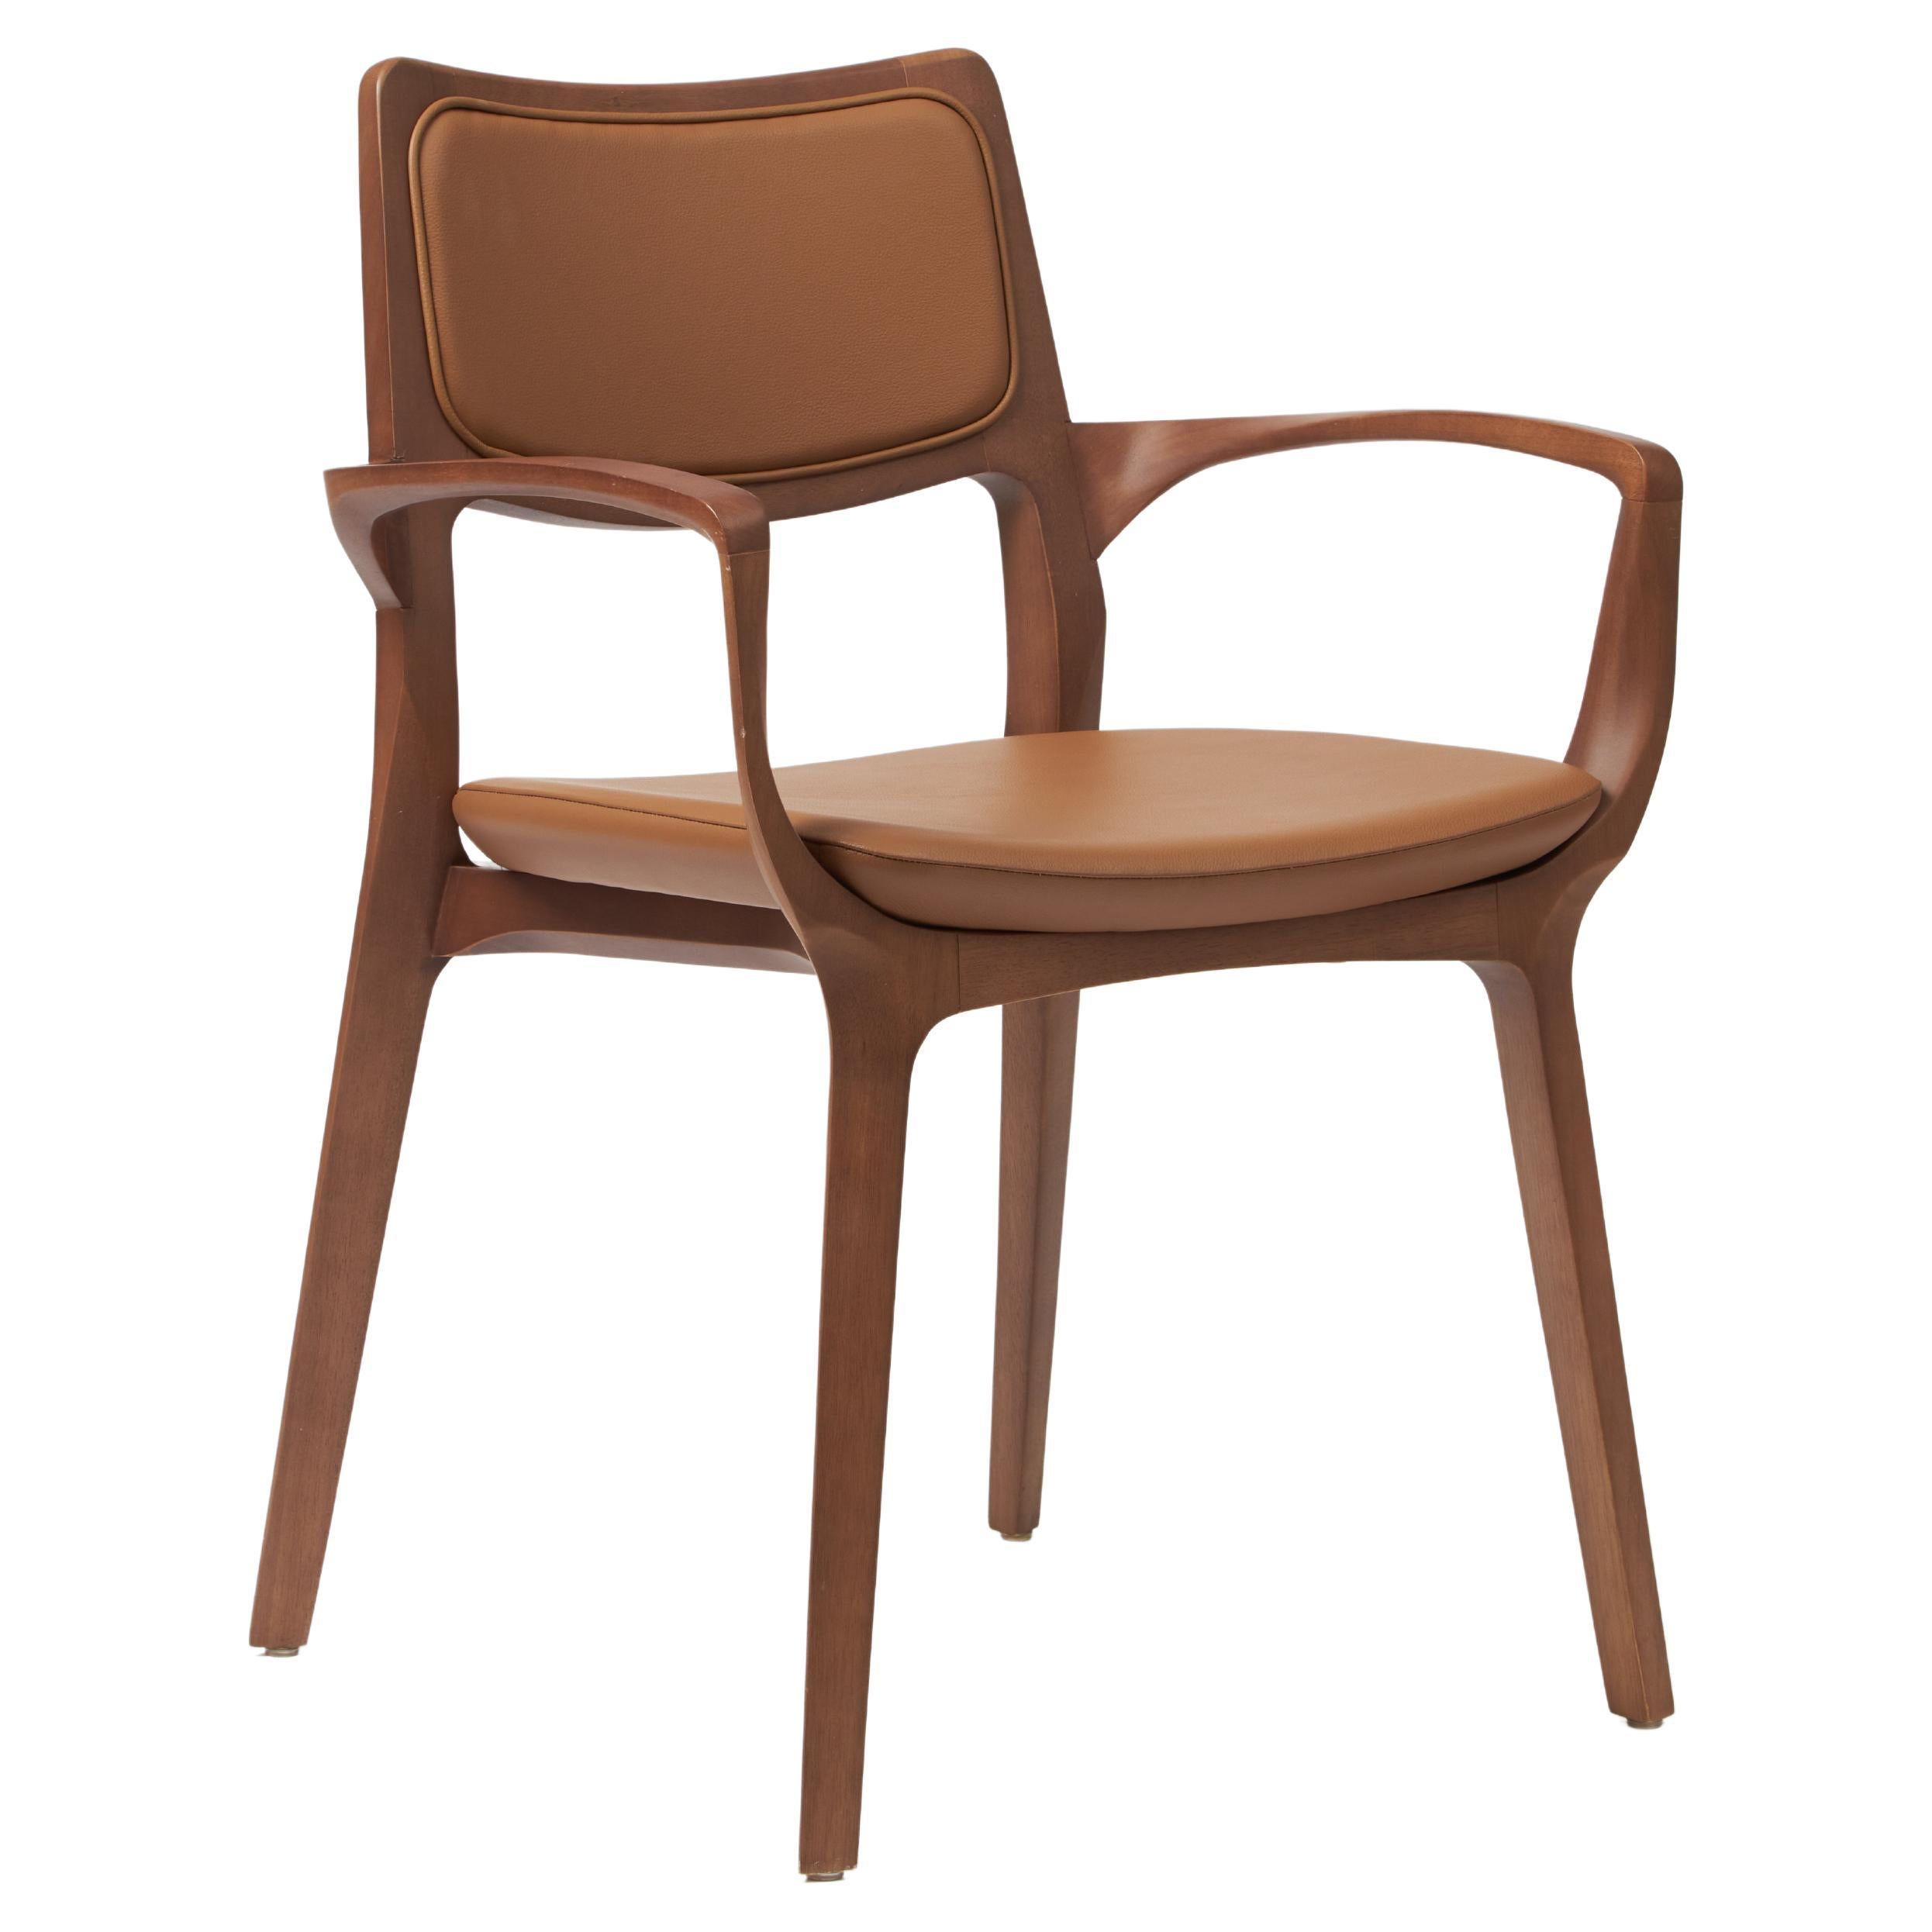 Modern Style Aurora Chair Sculpted in Walnut Finish Arms, leather back & seating For Sale